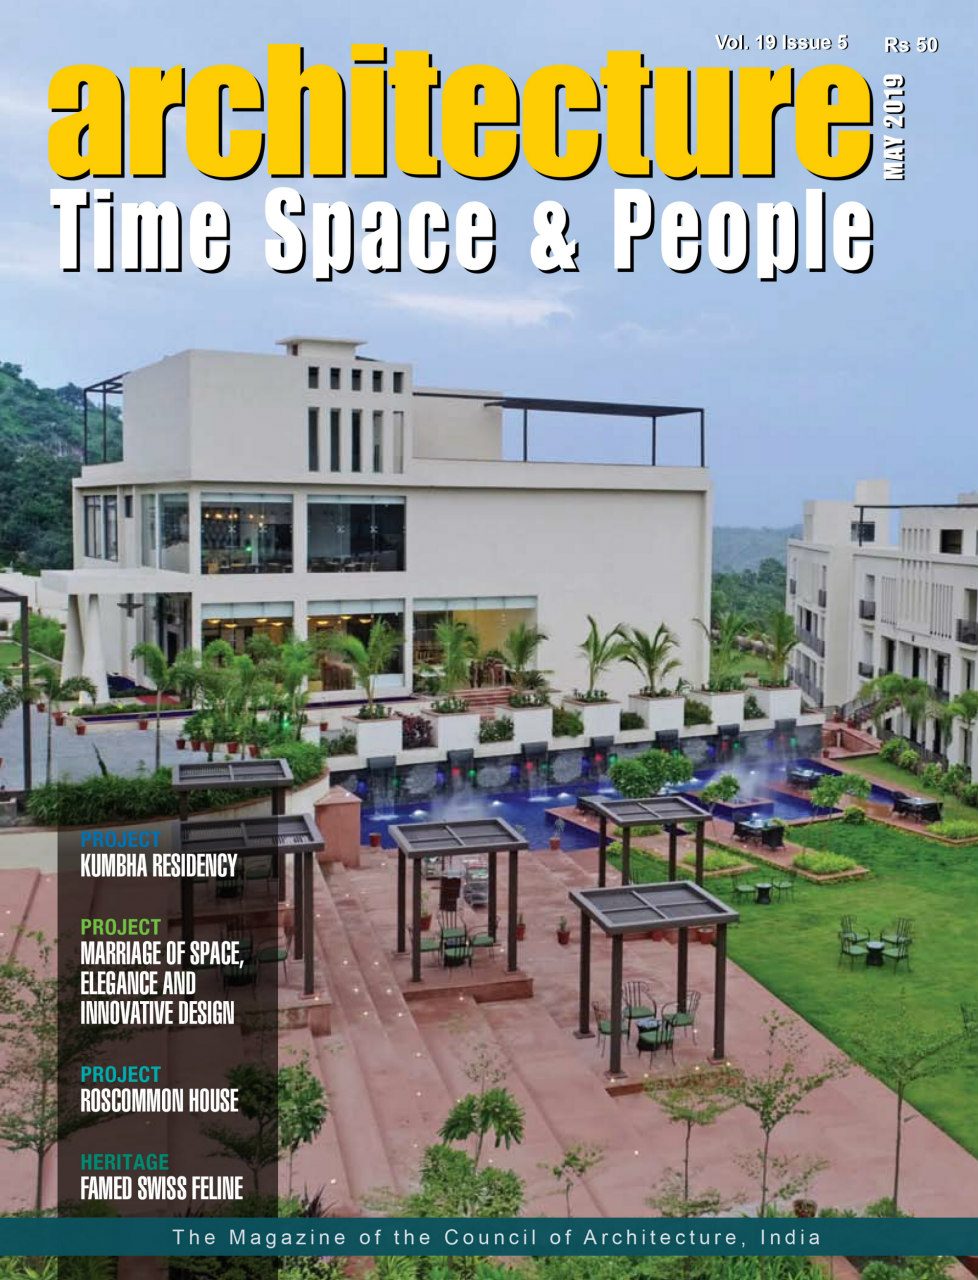 Architecture Time Space & People Magazine India, Roscommon House